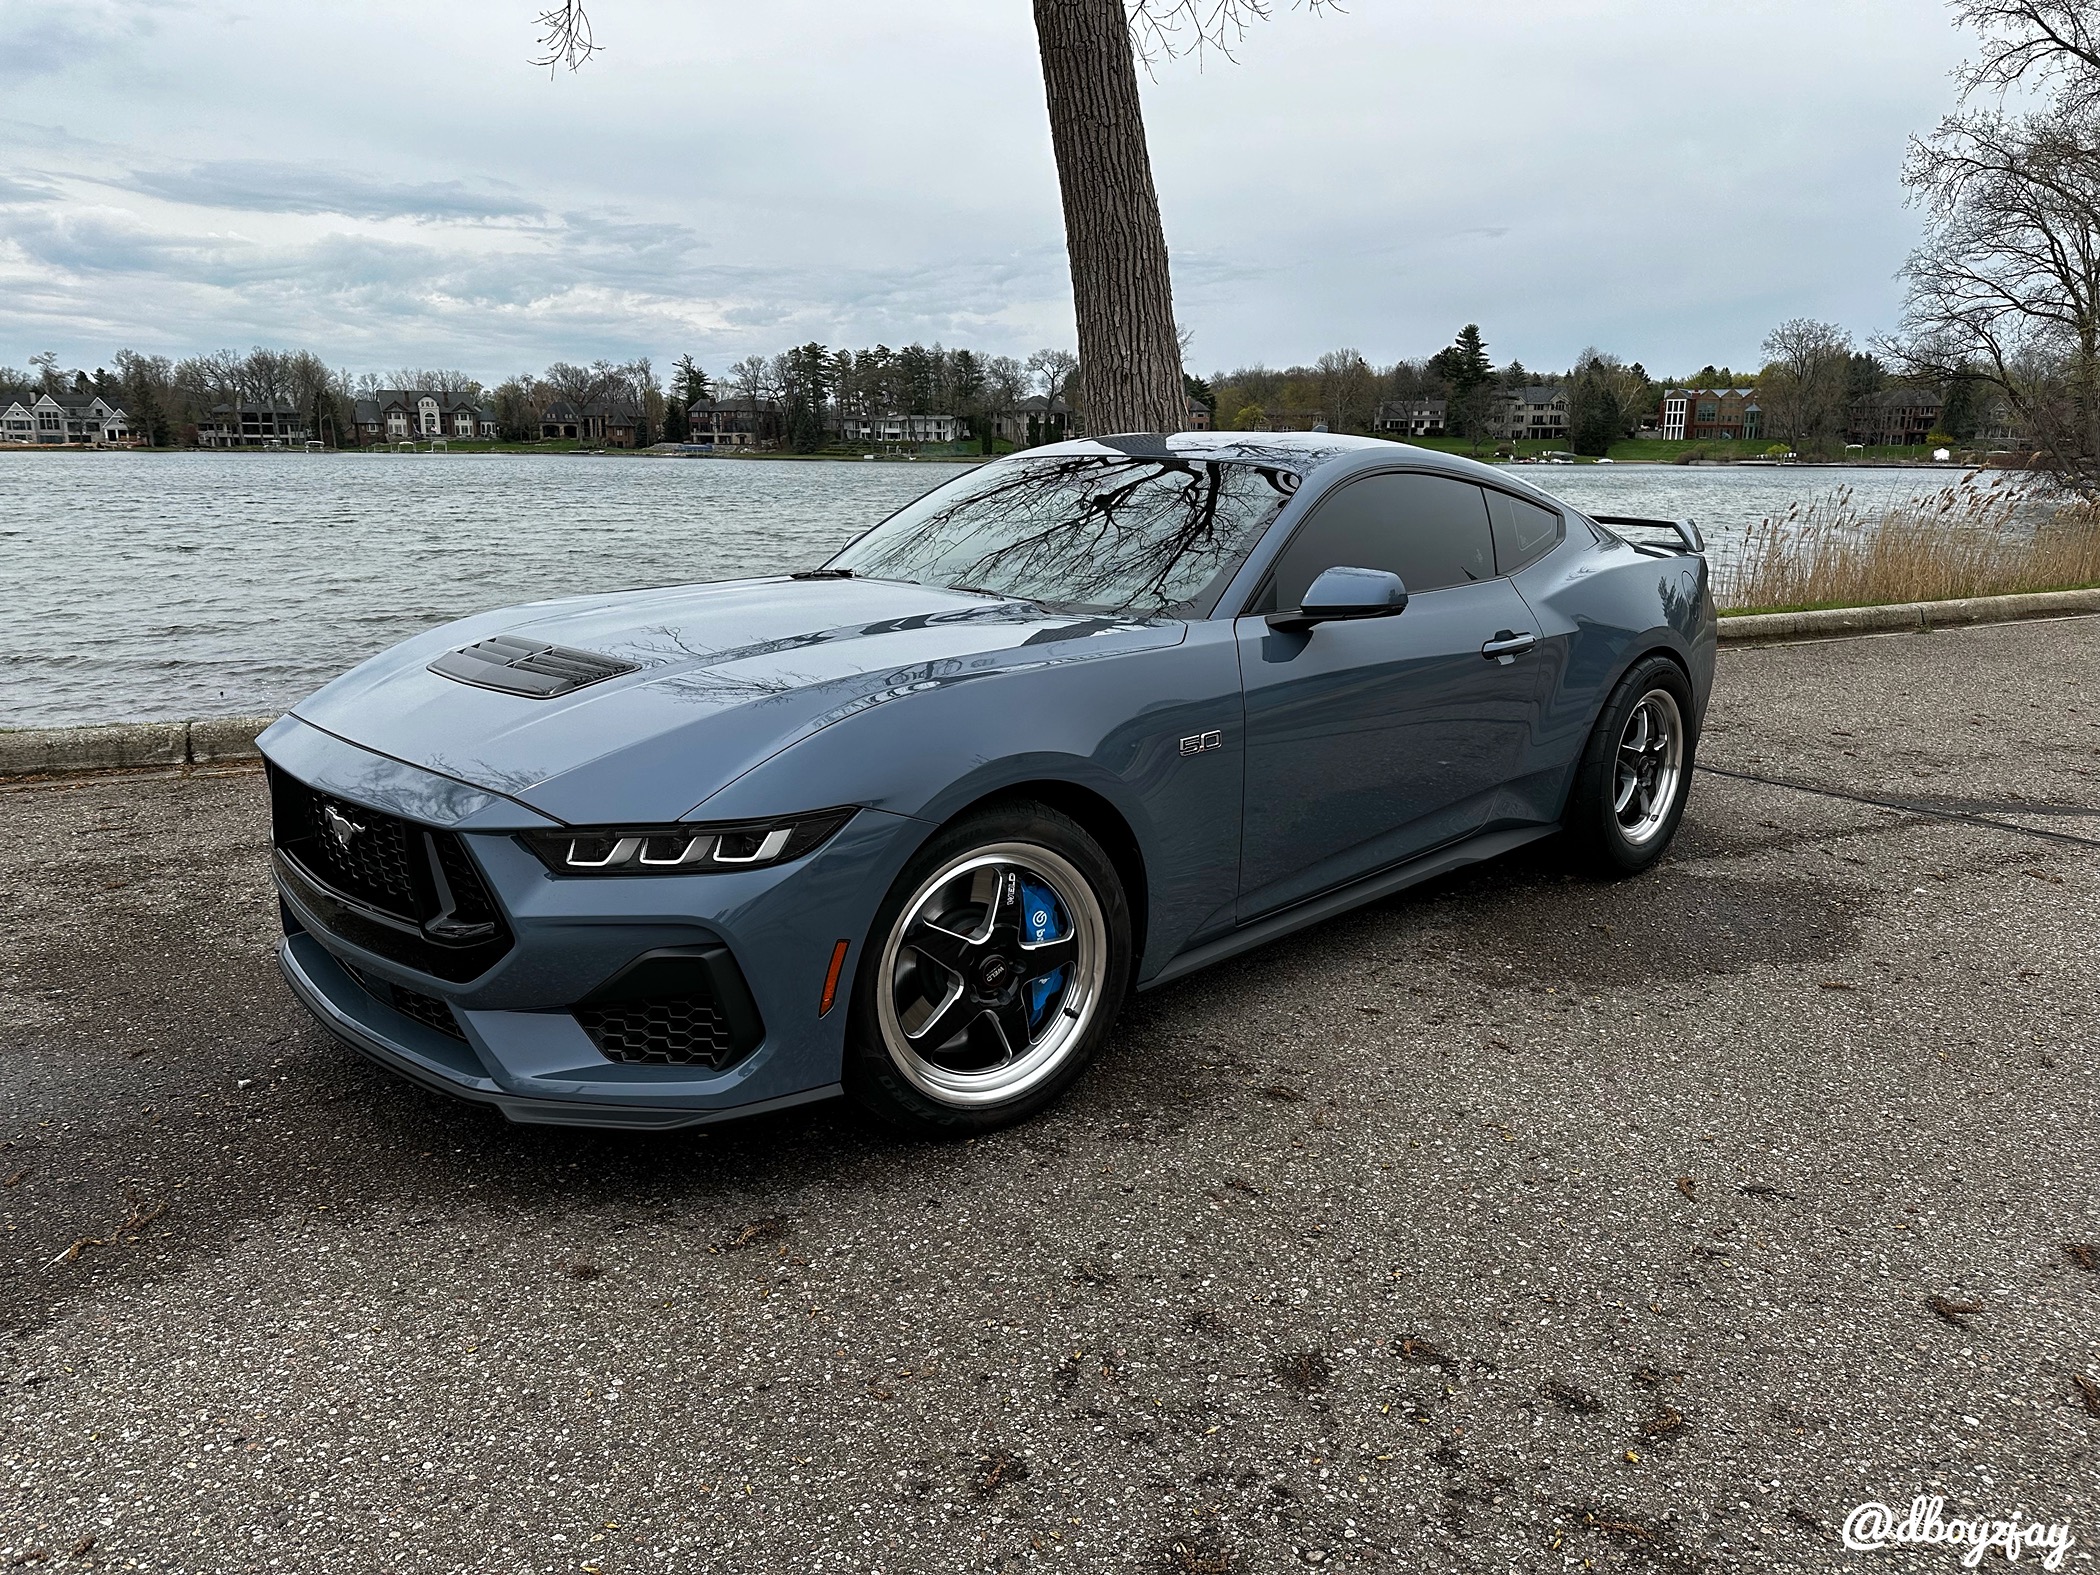 S650 Mustang Weld S155 Drag Pack installed on vapor blue Mustang Gt! Attachment-1